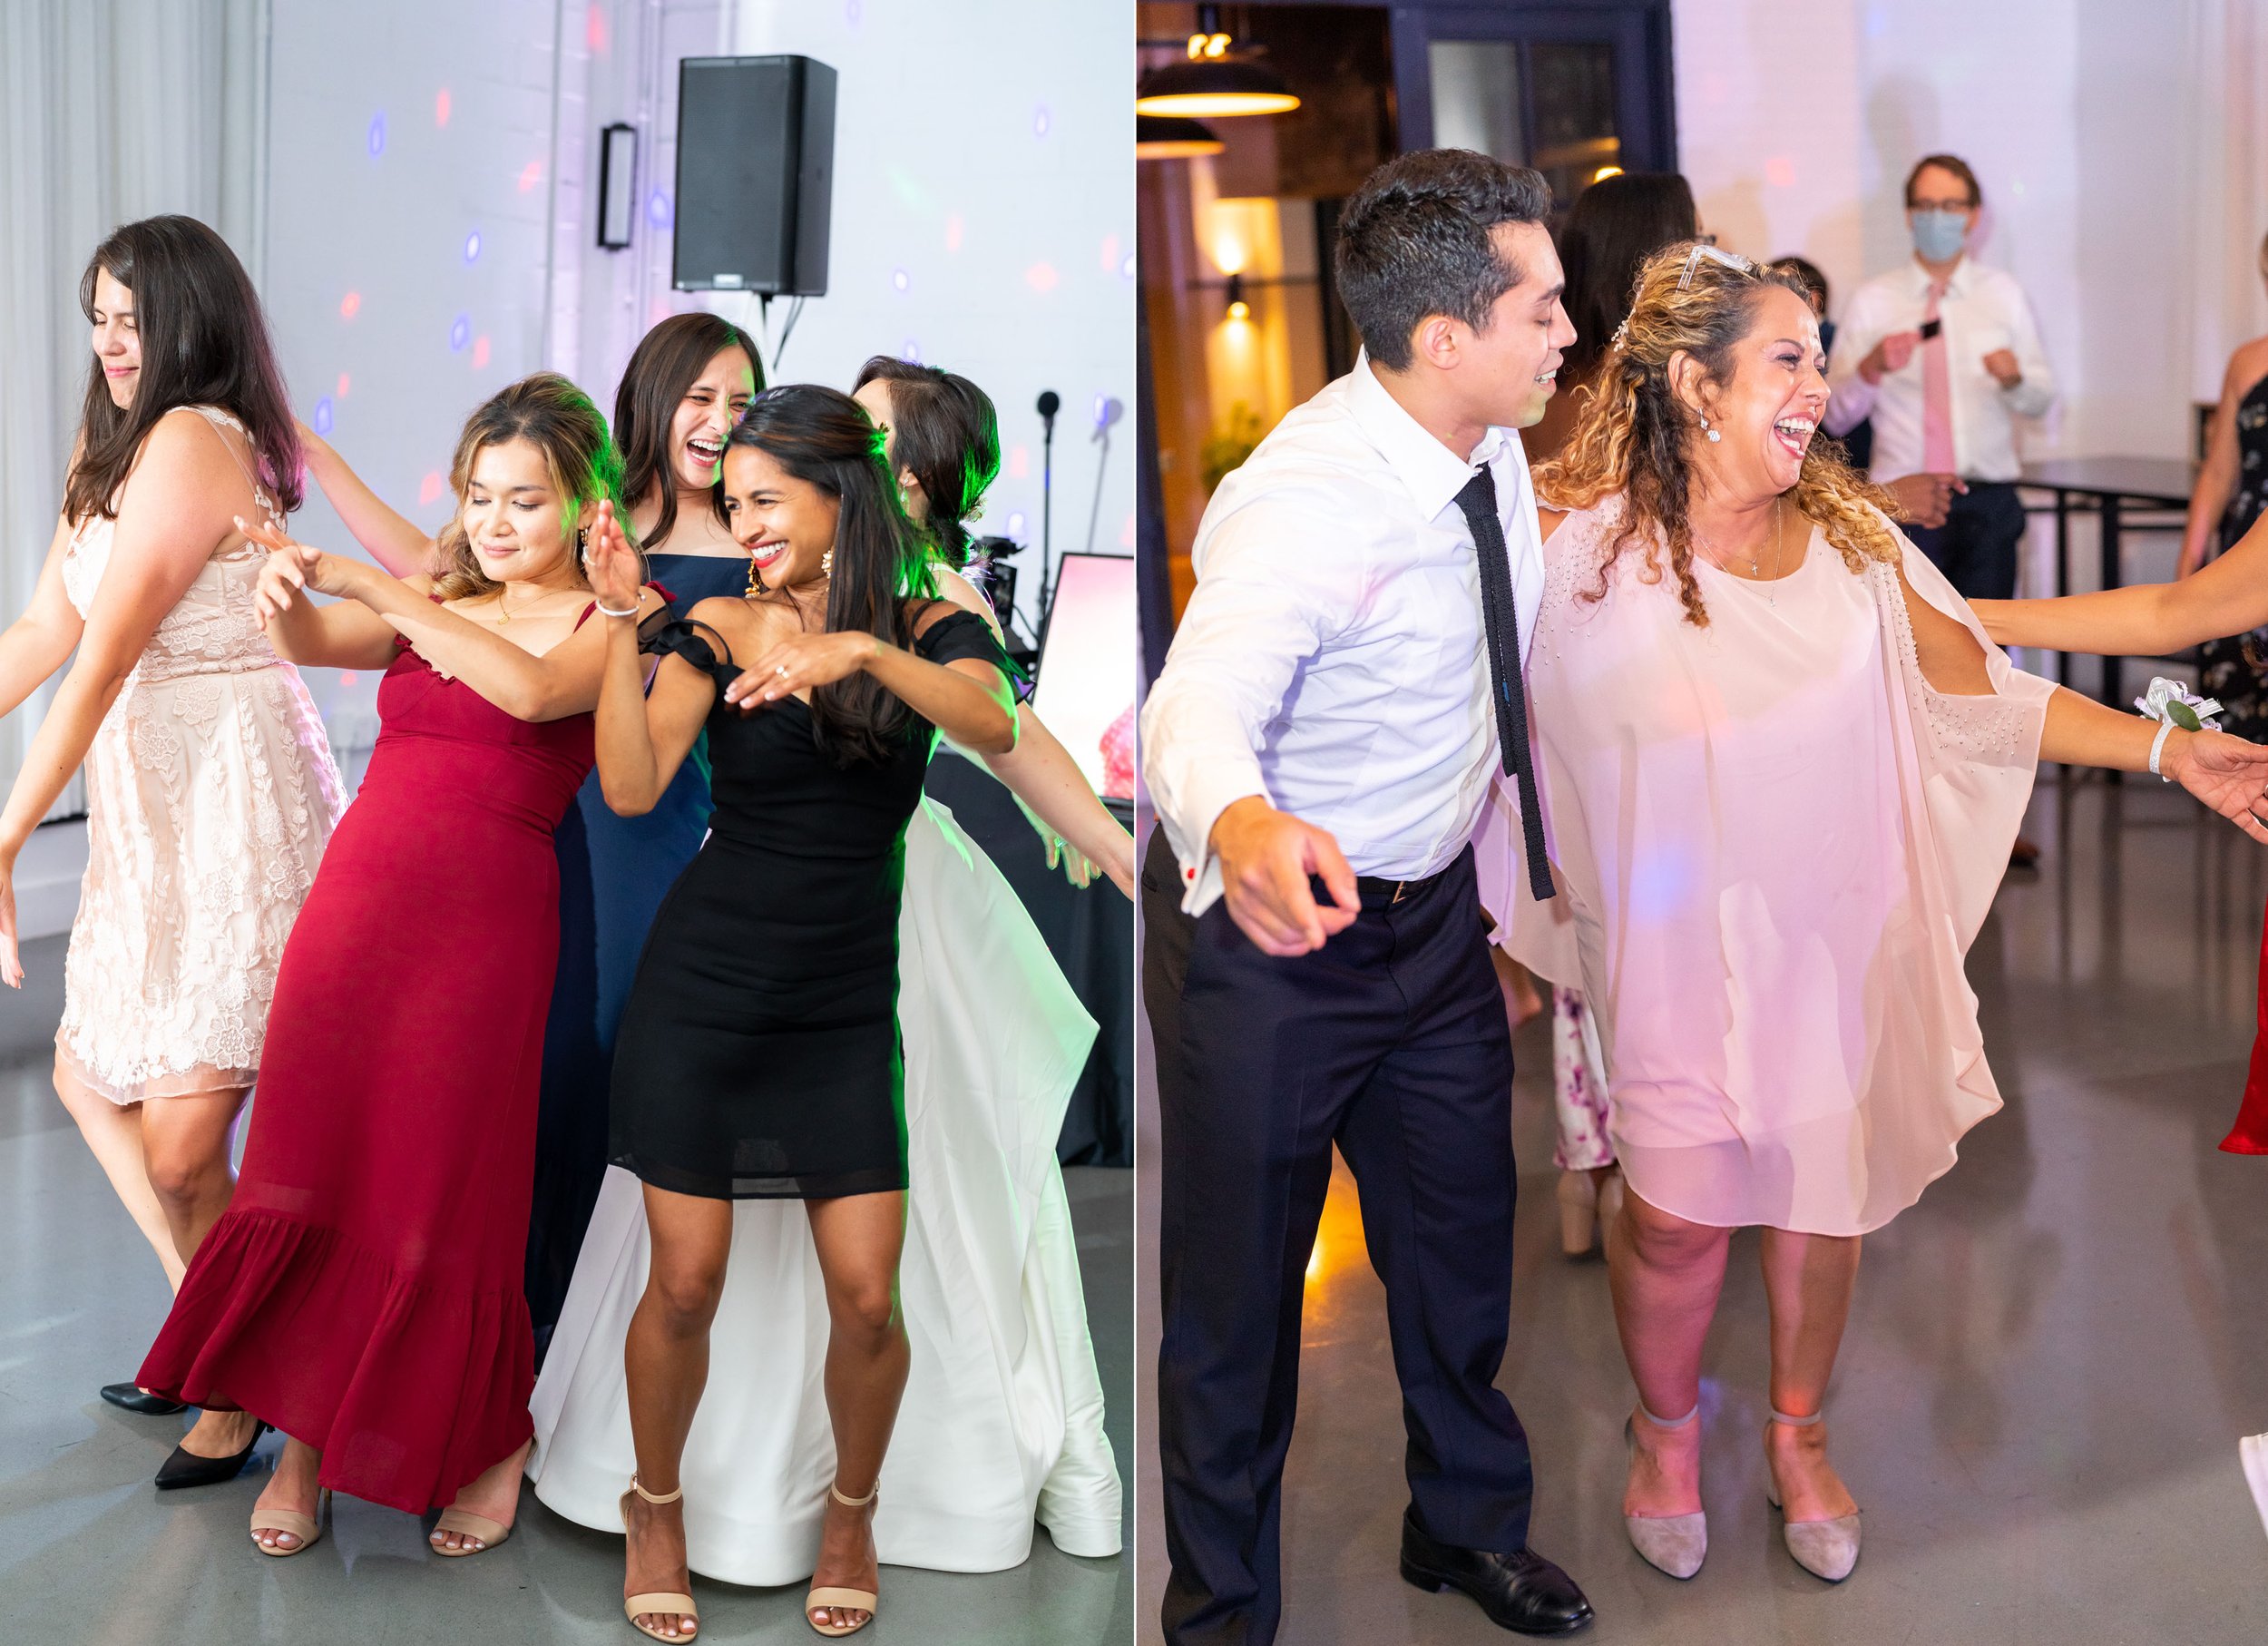 Guests dance with bride and groom during fun wedding reception